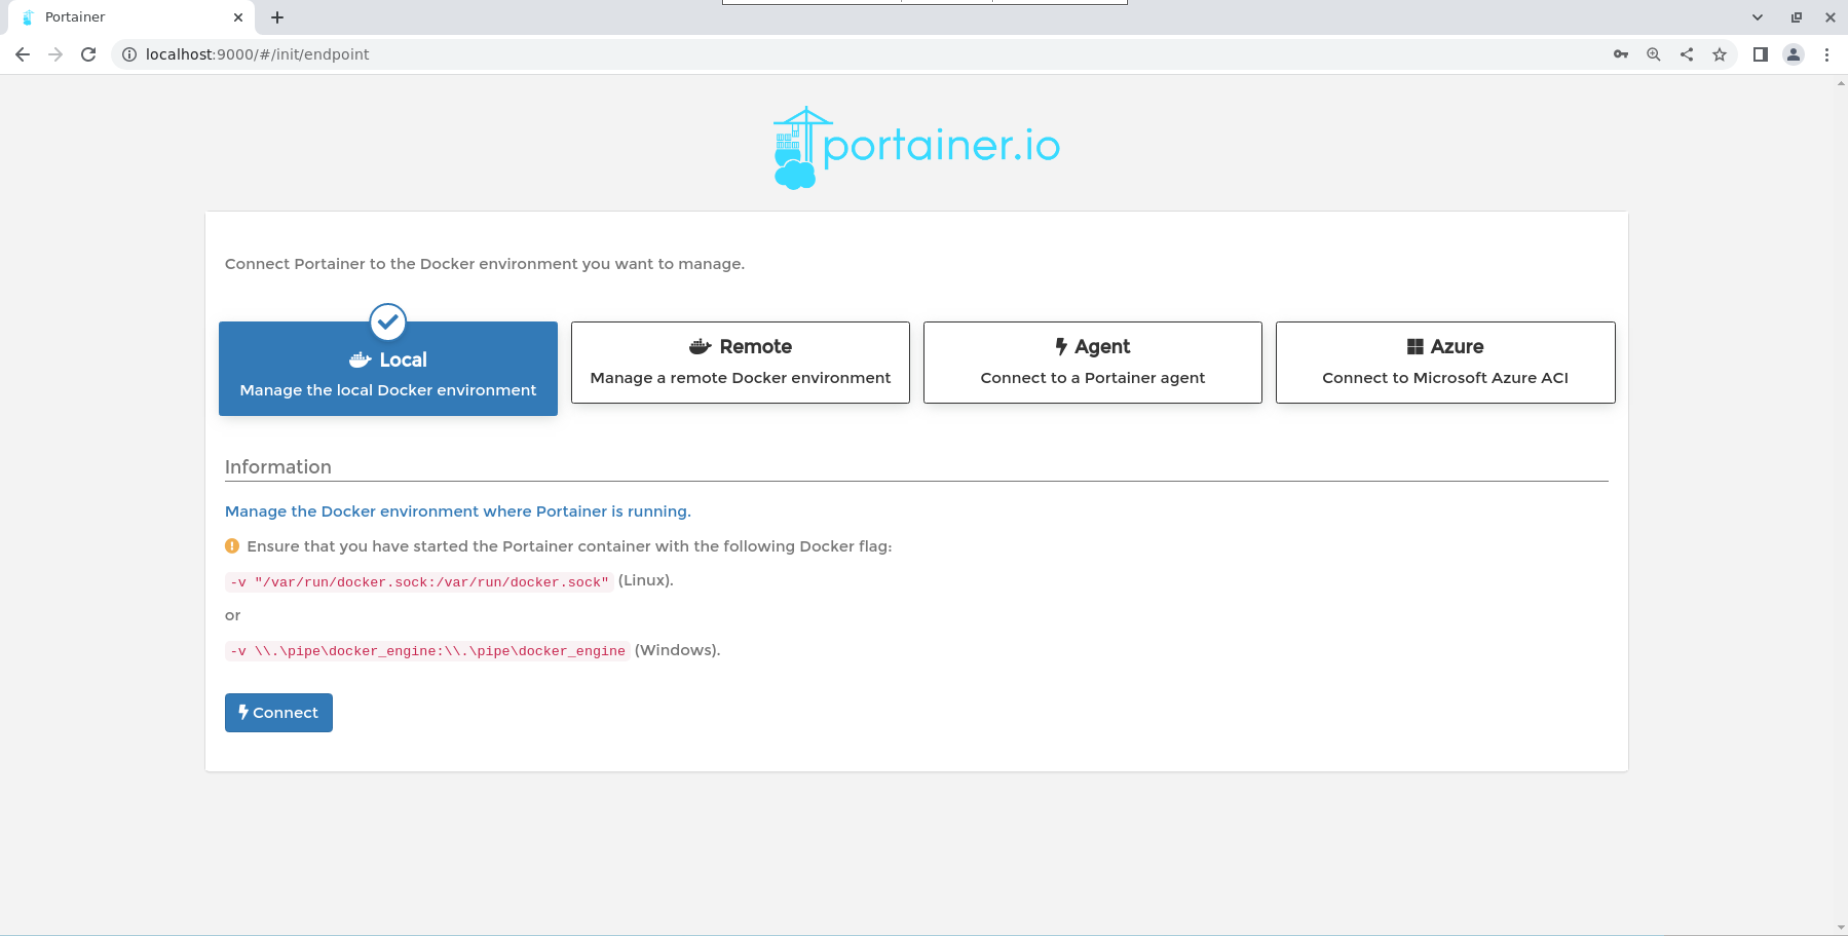 Screenshot of Selecting Local Docker Environment button out of the 4 choices on the screen: remote, agent, and Azure